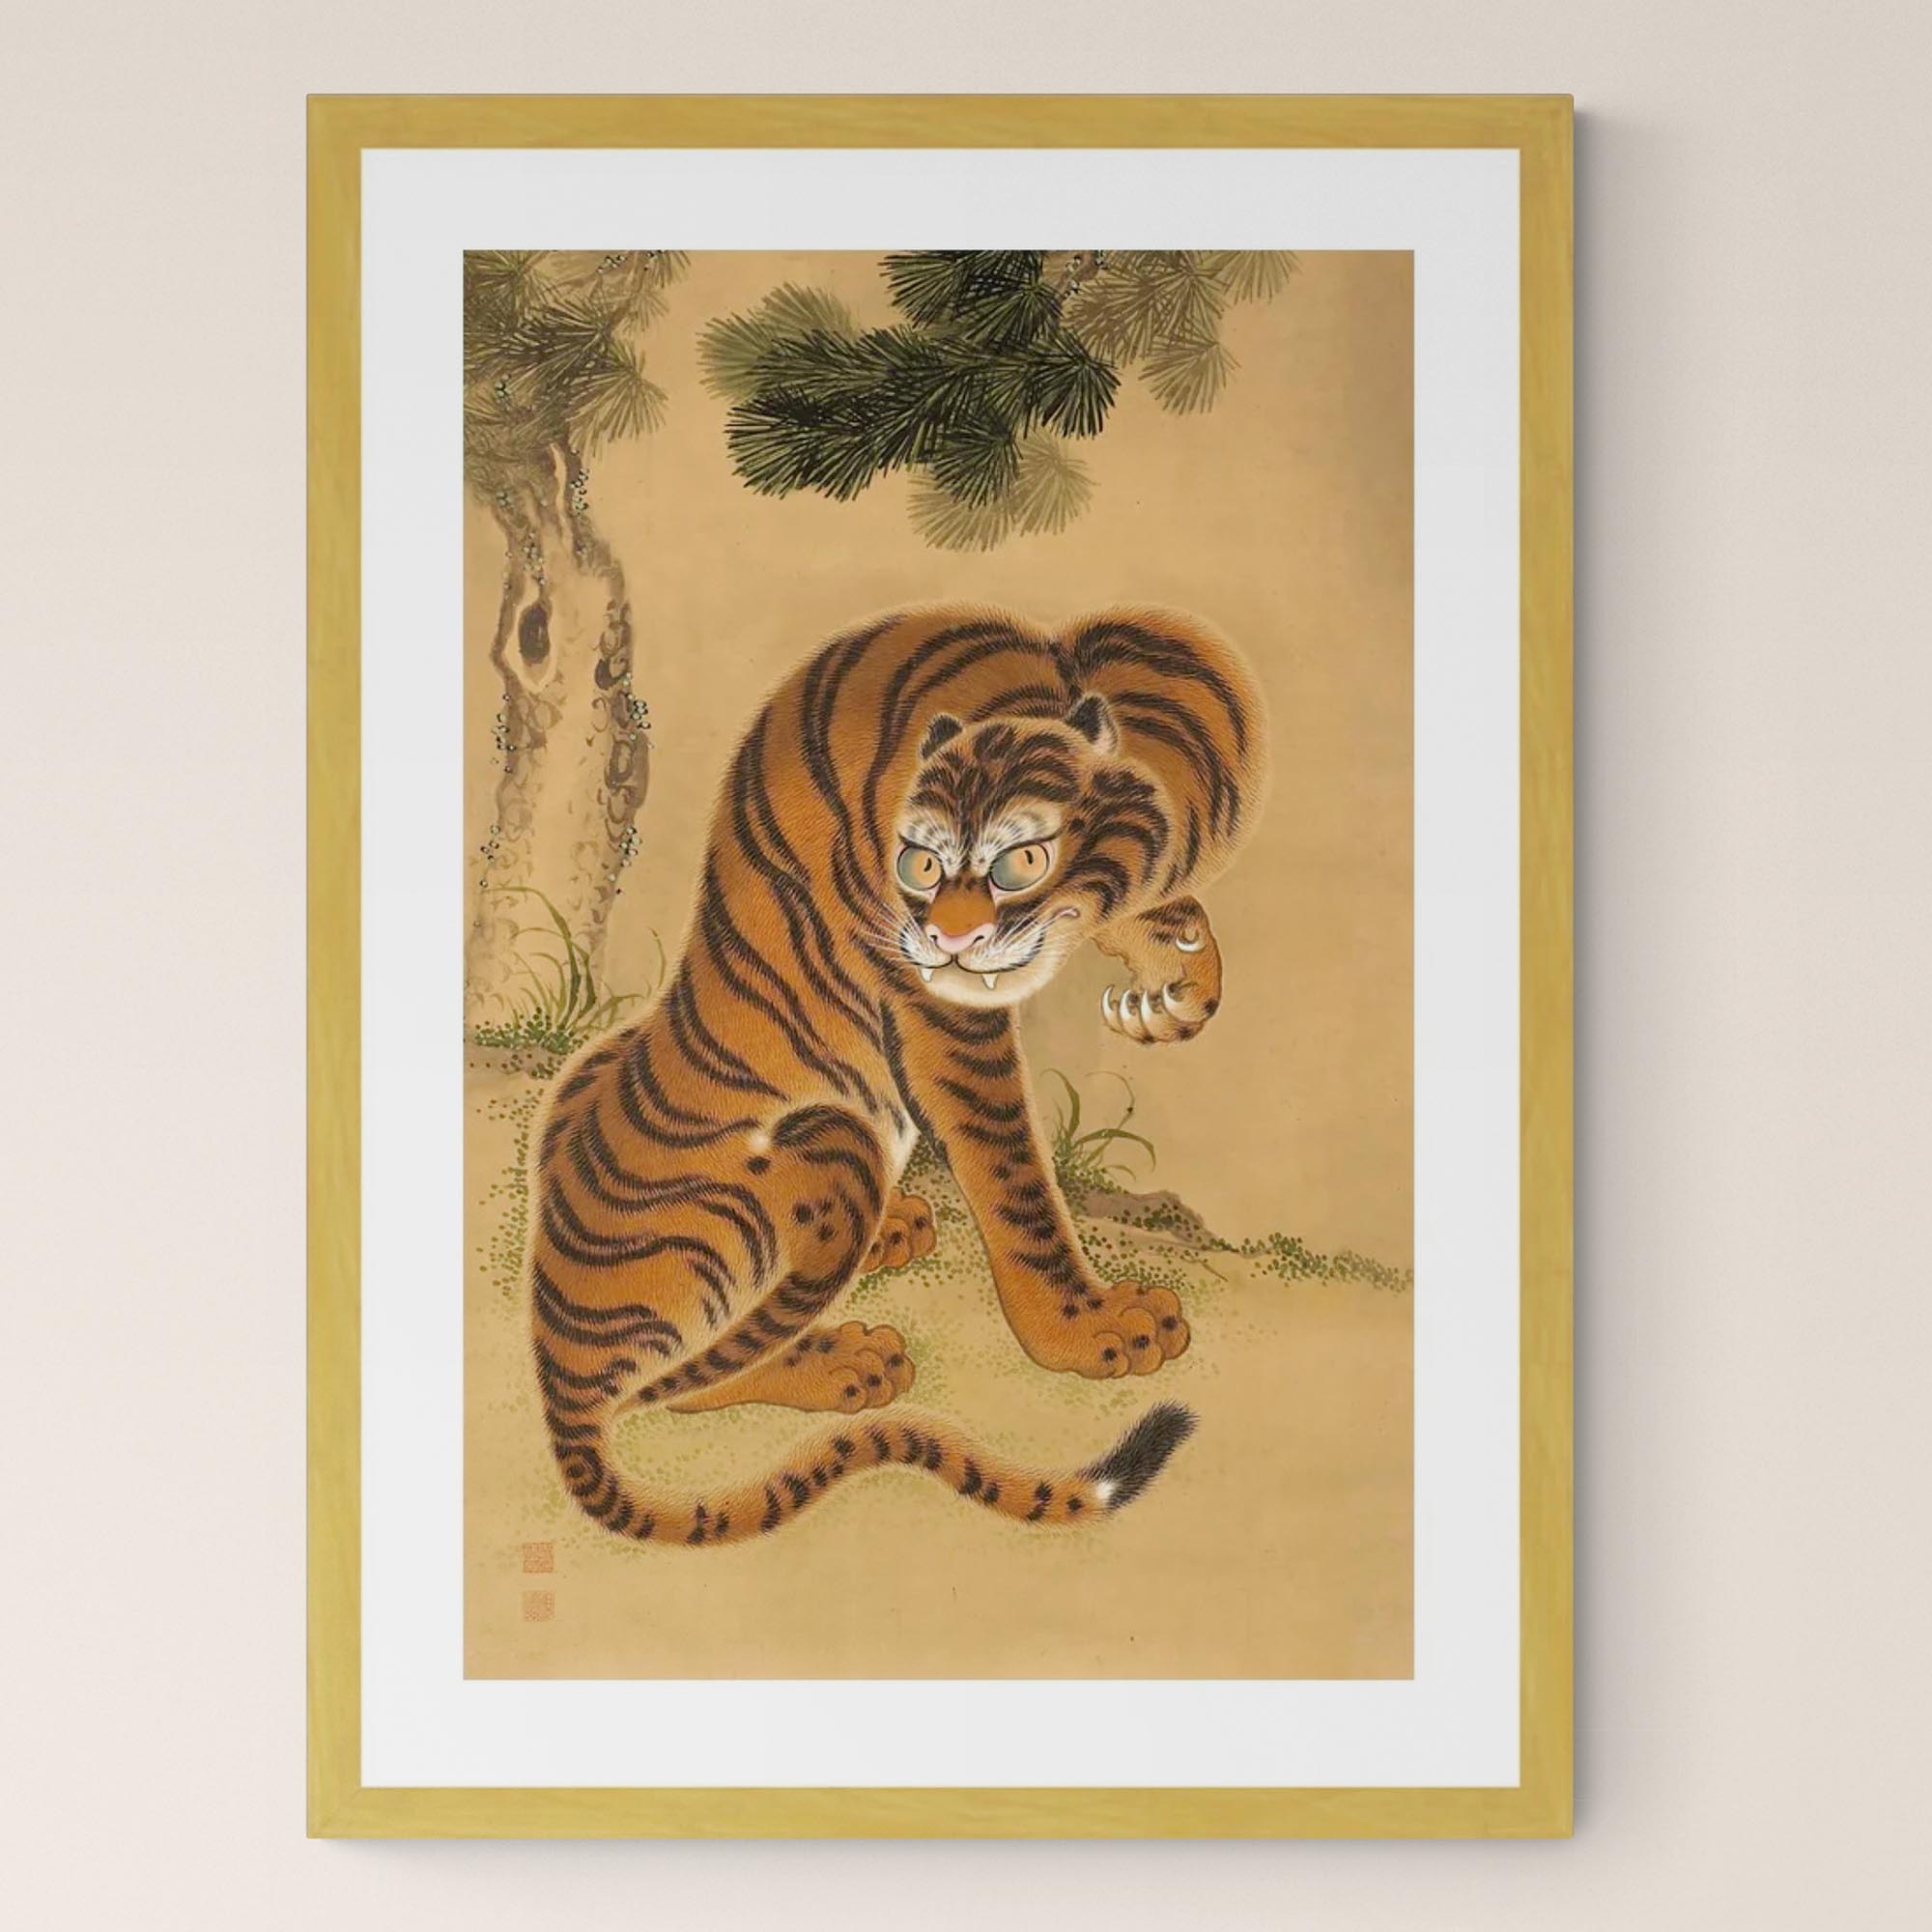 Fine art 6"x8" / Gold Frame Exquisite Tiger Cleaning its Paw: Japanese Sumi-e Art, Asian Animal Nature Wildlife Jungle Antique Vintage Framed Print